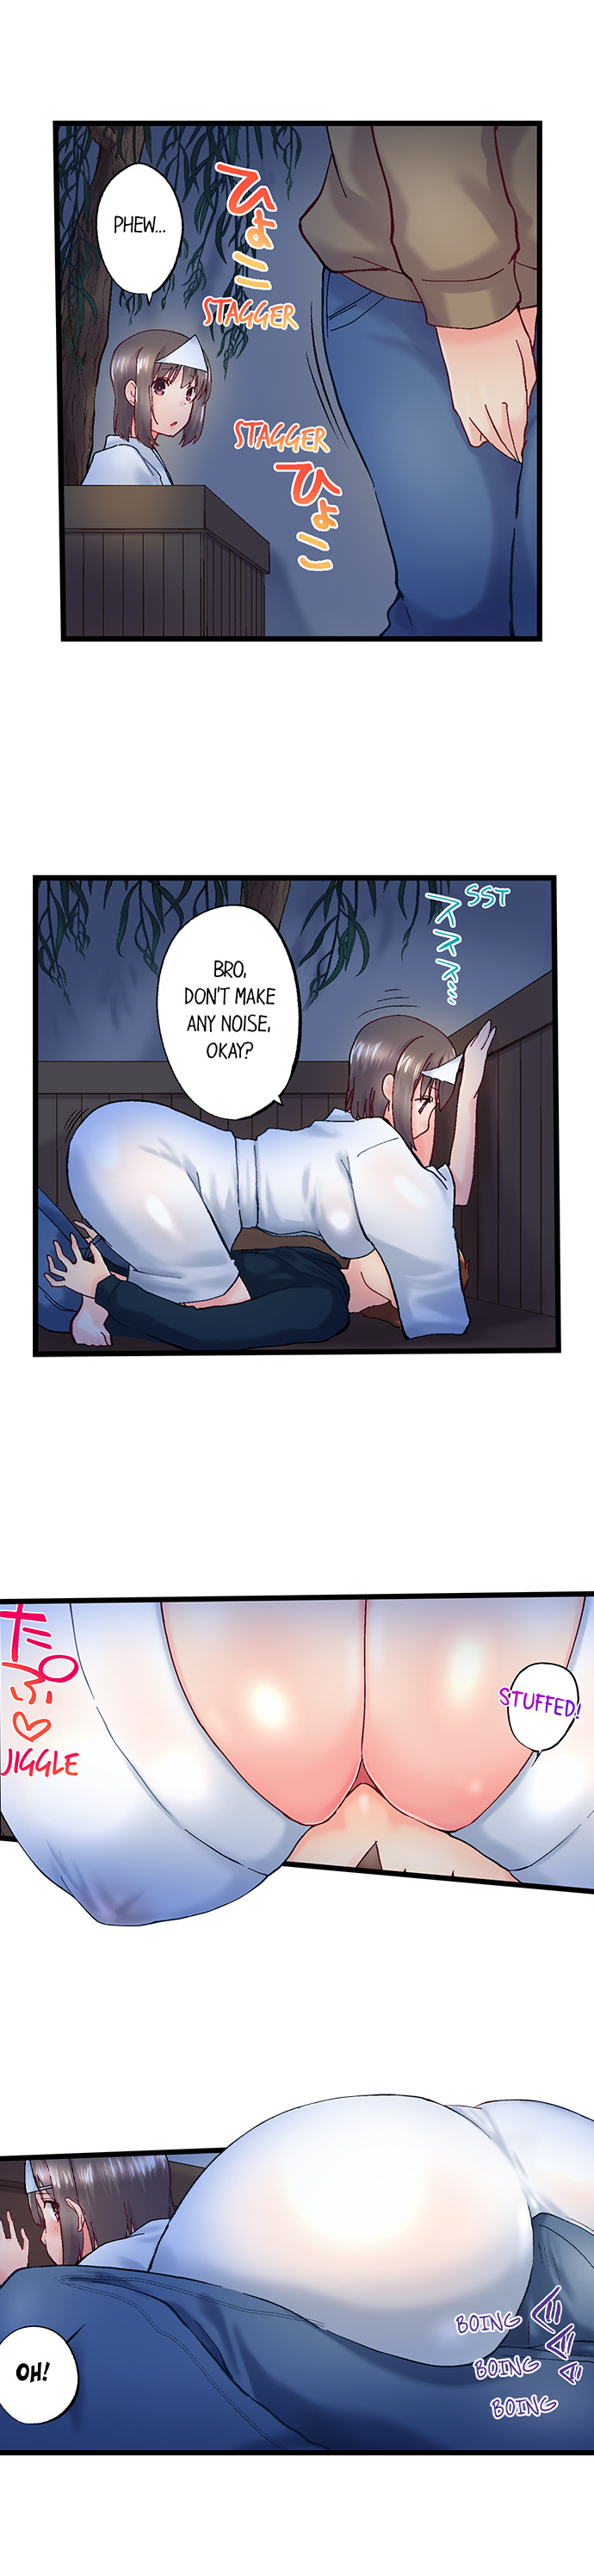 My Brother’s Slipped Inside Me in The Bathtub - Chapter 98 Page 3